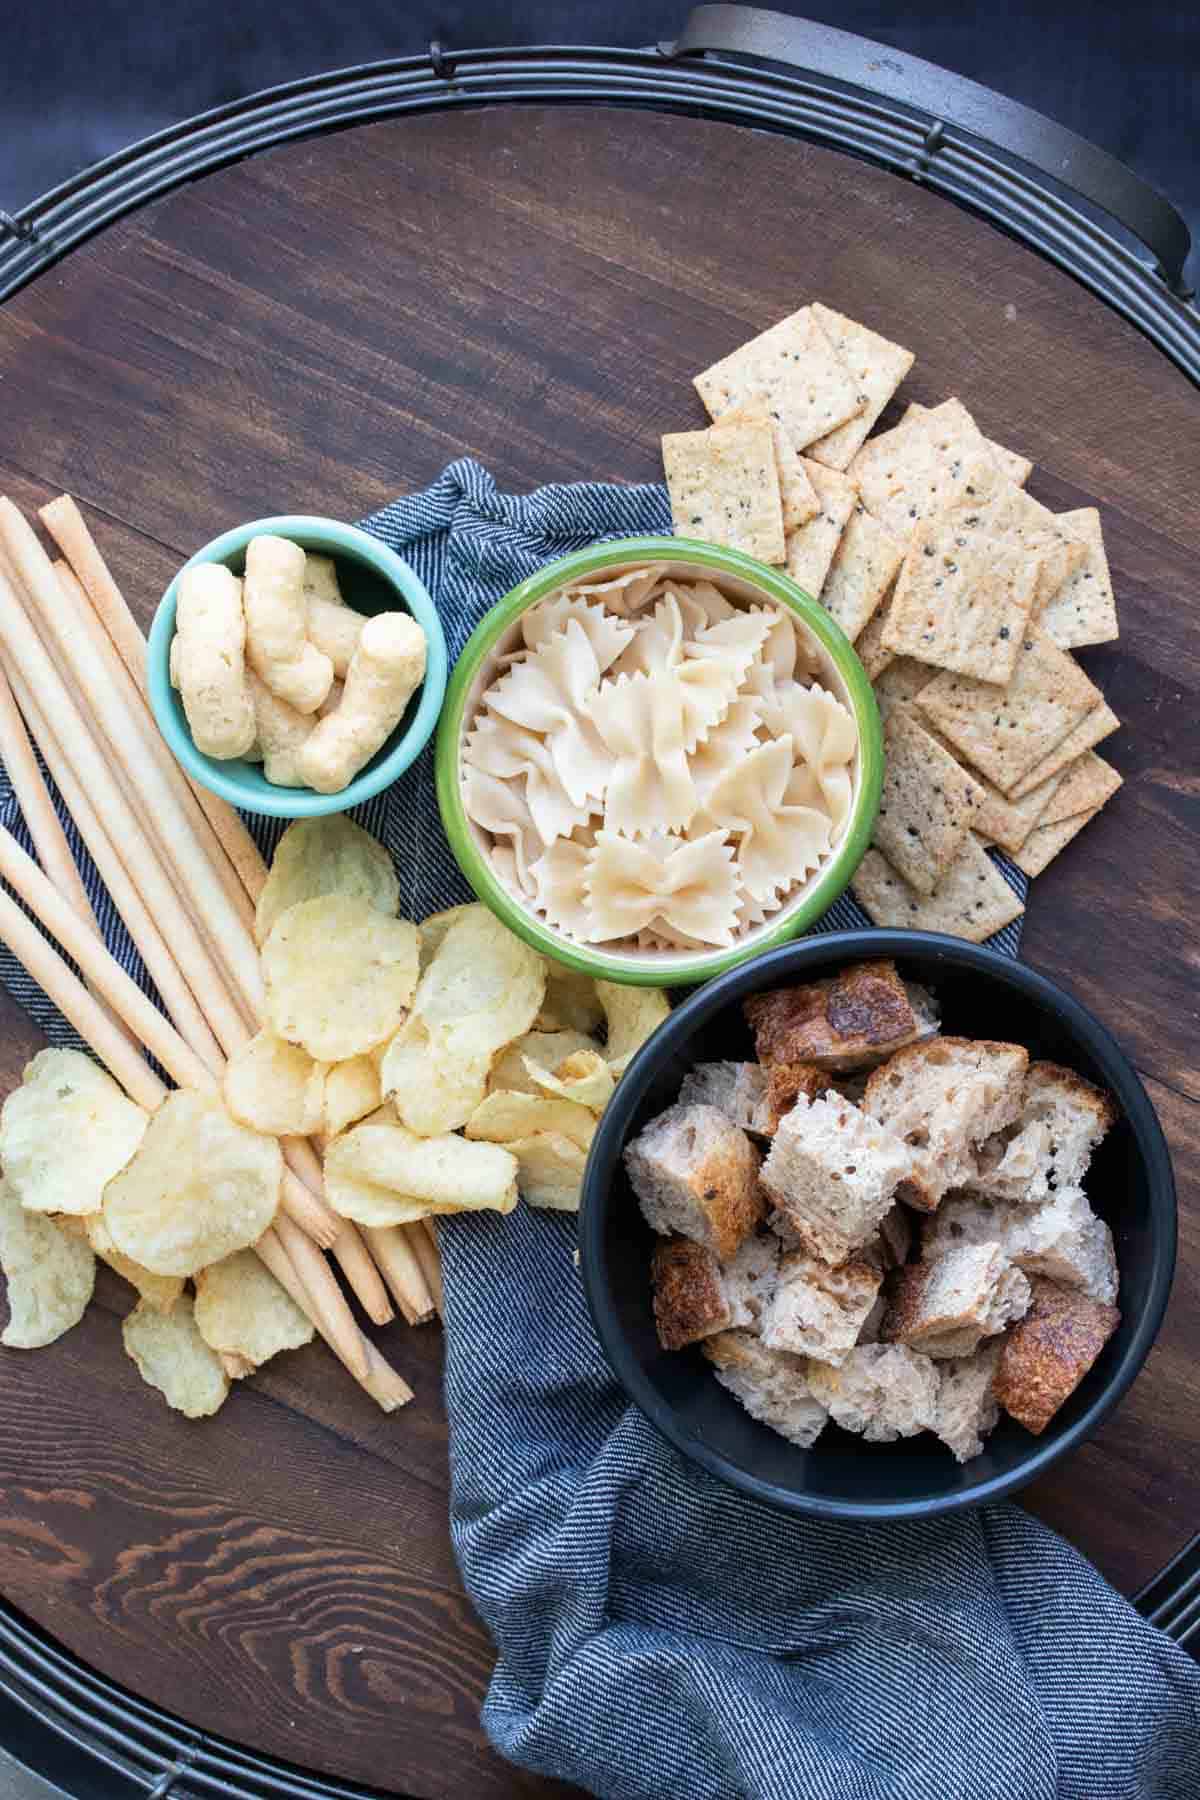 Different kinds of crackers, bread, snacks and pasta in bowls